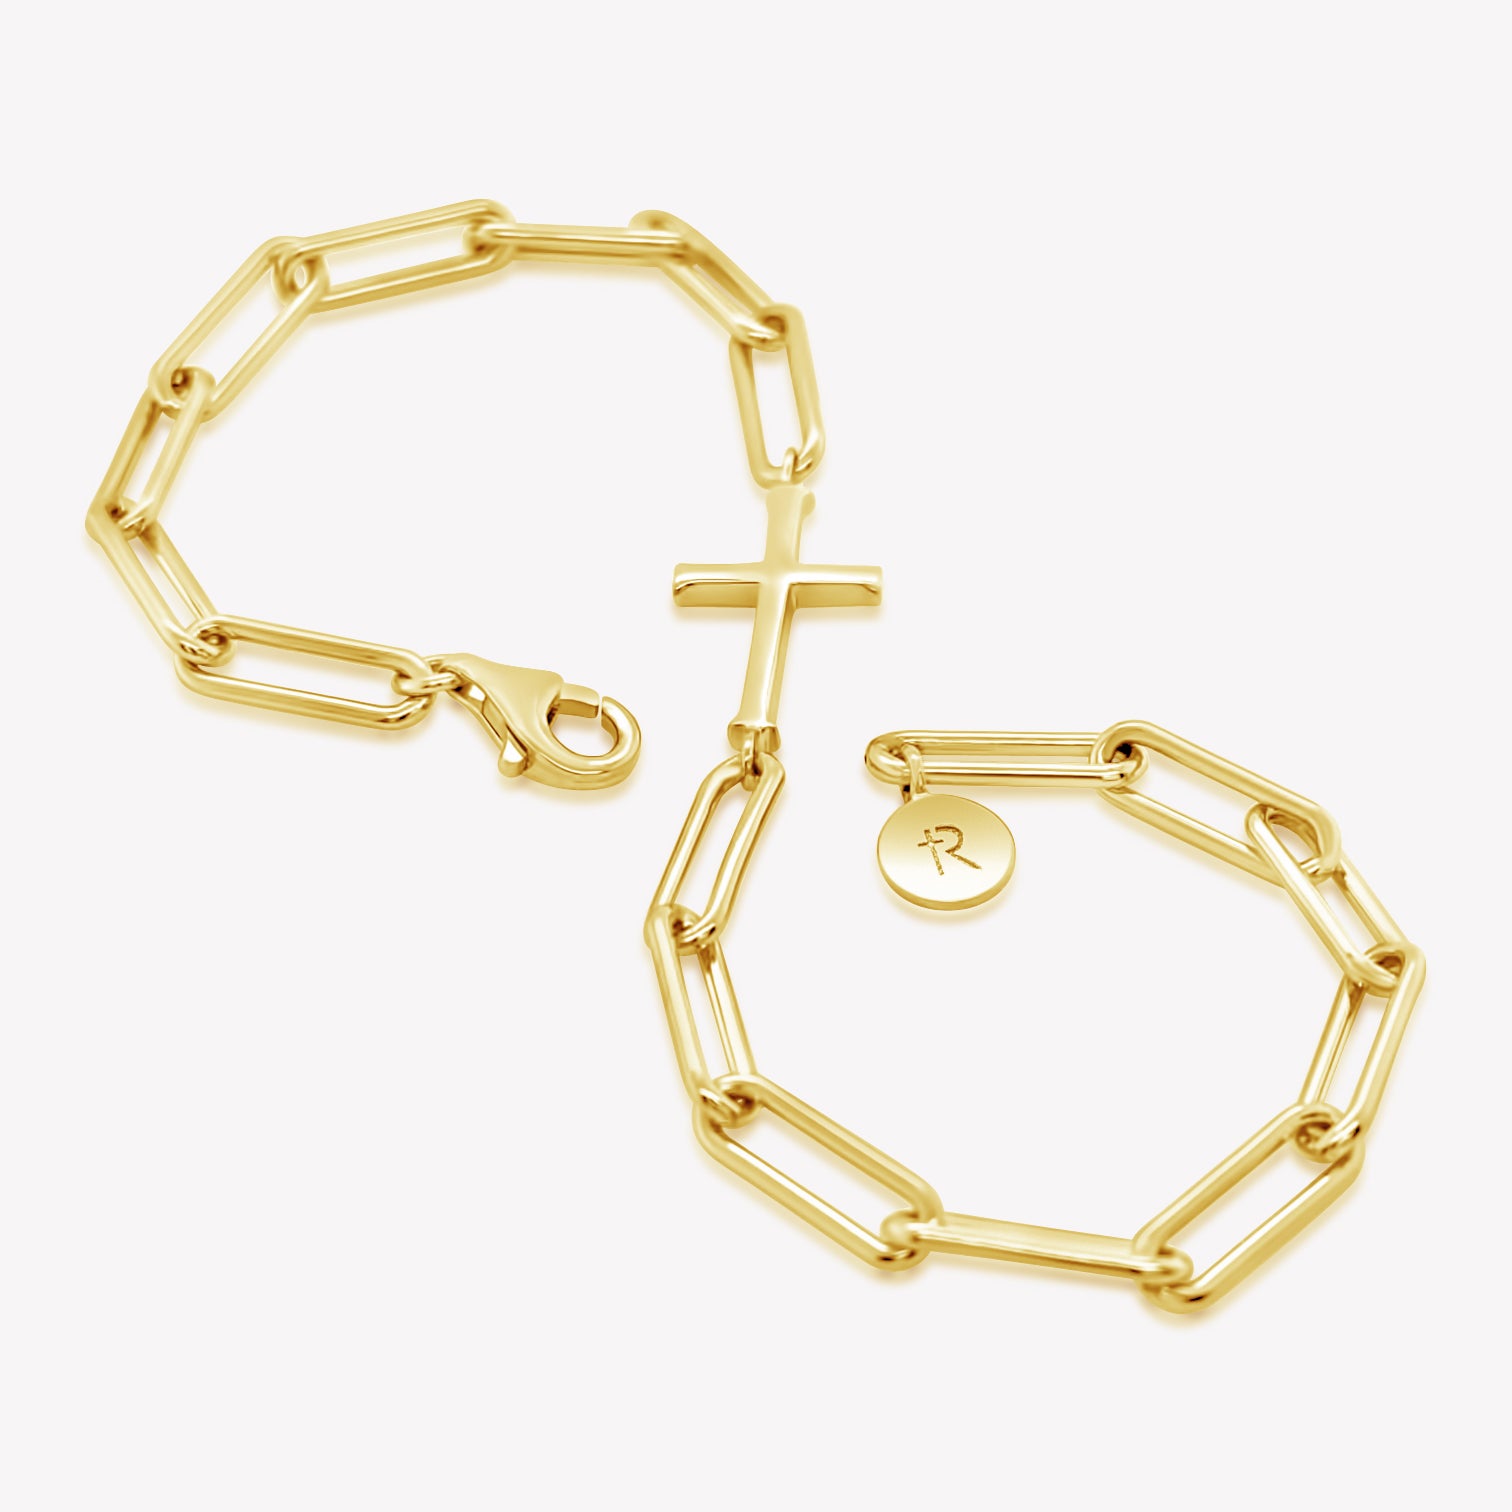 Rizen Jewelry Chain Breaker bracelet in 18kt yellow gold.  Elegant Cross Pendant breaks up the contemporary paper clip link chain with classic lobster clasp  closure, and circular Rizen tag on last link of chain wrapped in the shape of an infinity symbol.